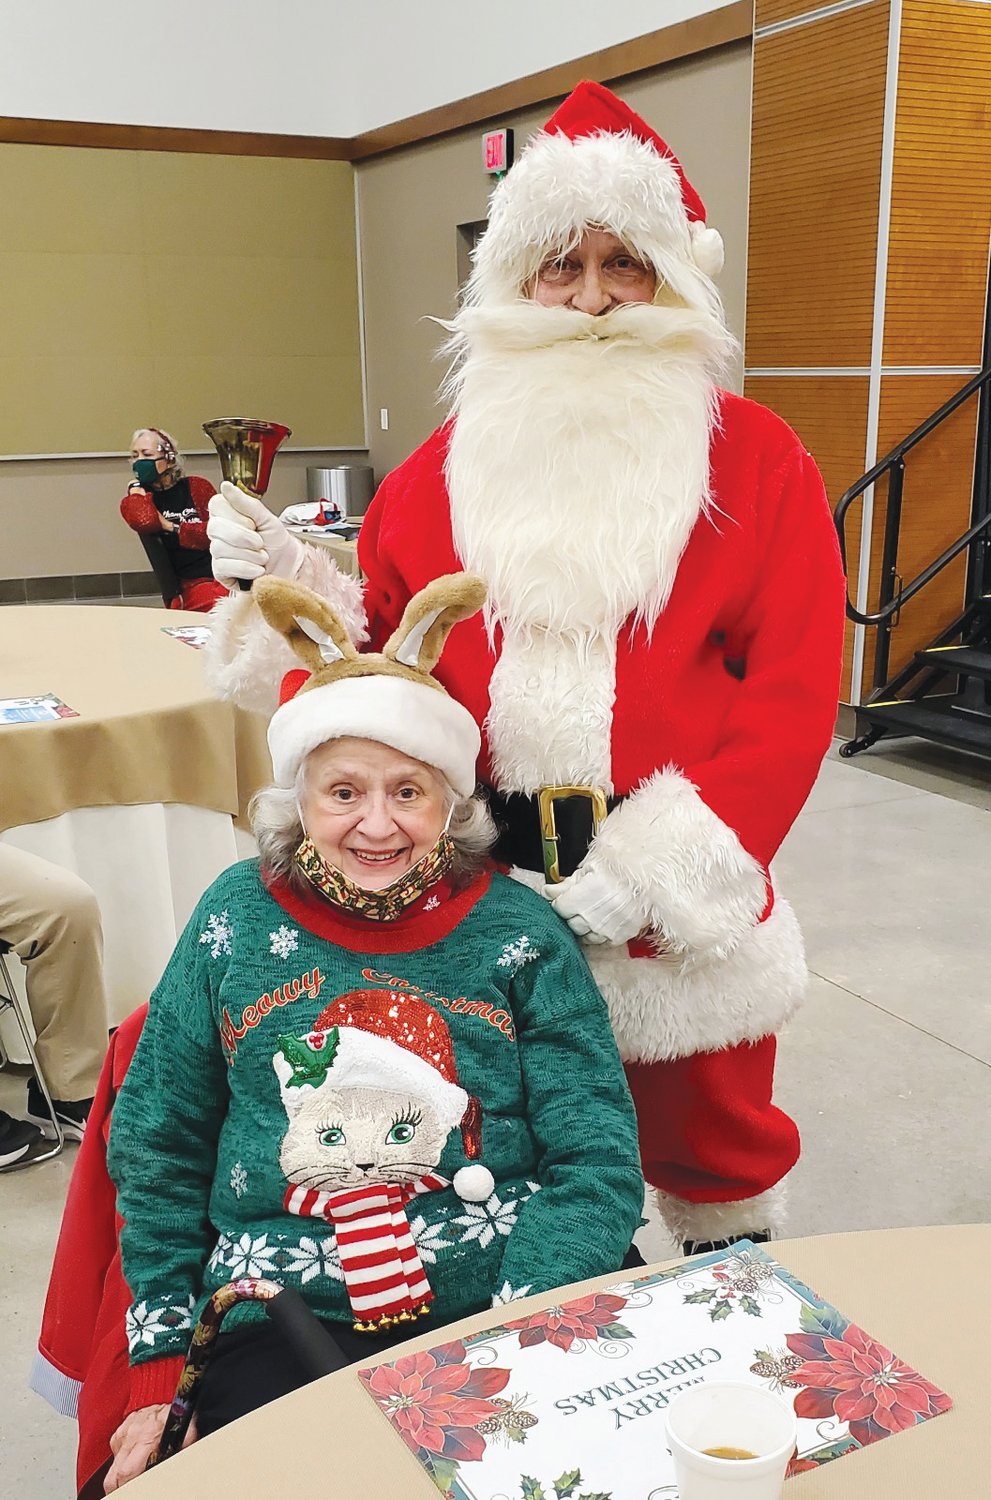 Council on Aging Director  Dennis Streets portrays Santa, posing with Mary Lou Mackintosh.